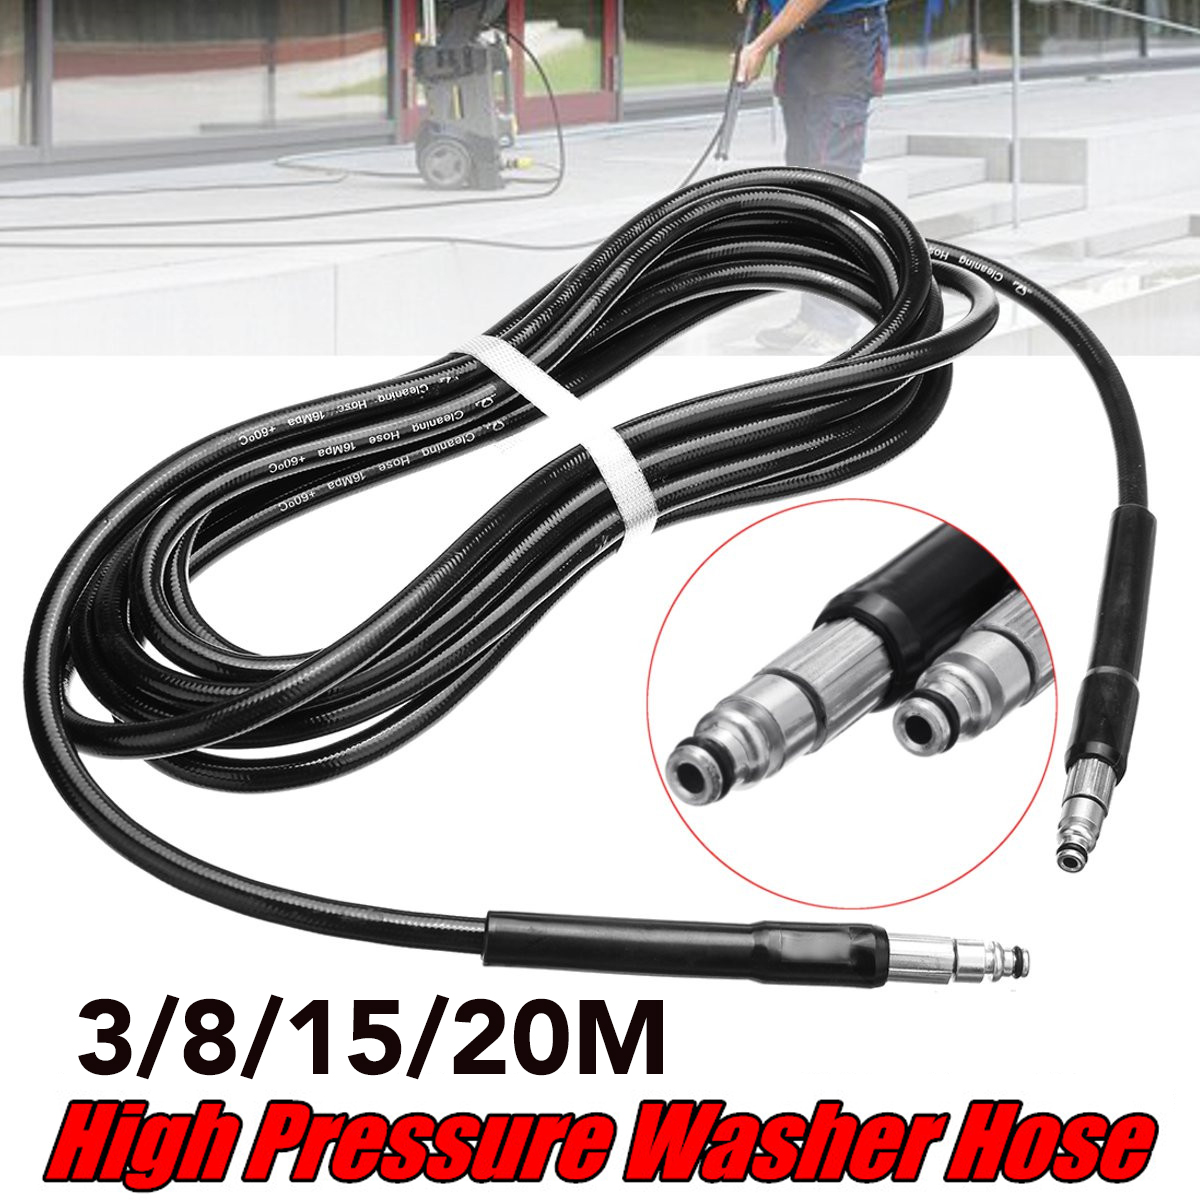 381520M-High-Pressure-Washer-Water-Hose-for-Black-Decker-PW1400-PW1500-1574751-1